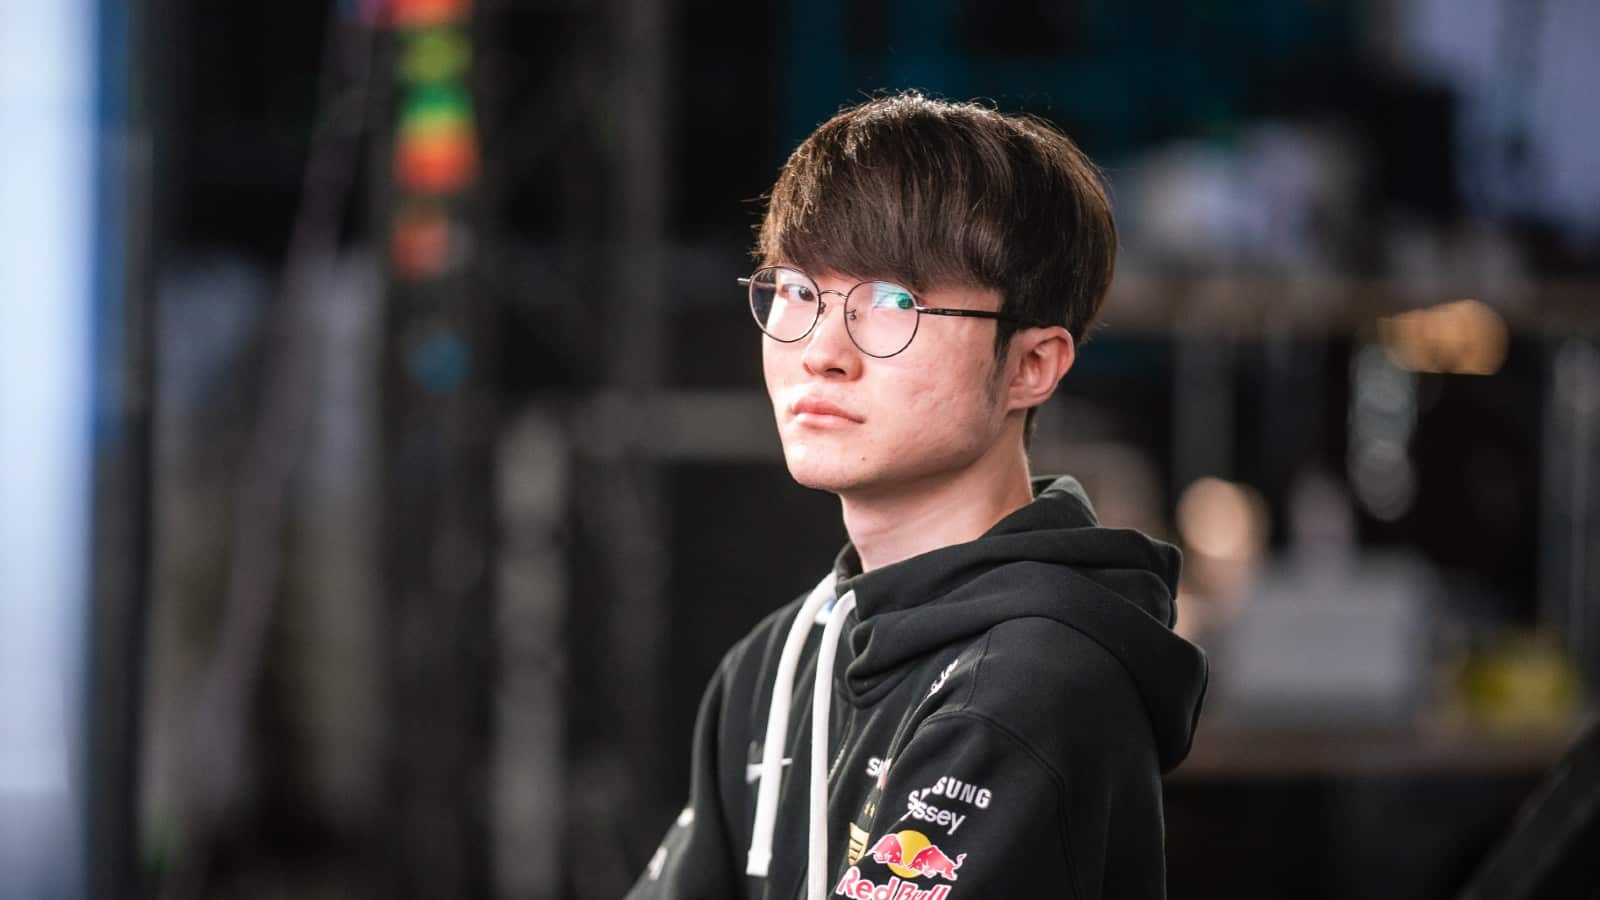 Faker wants a challenge in Worlds 2021 playoffs: “I'm here to win